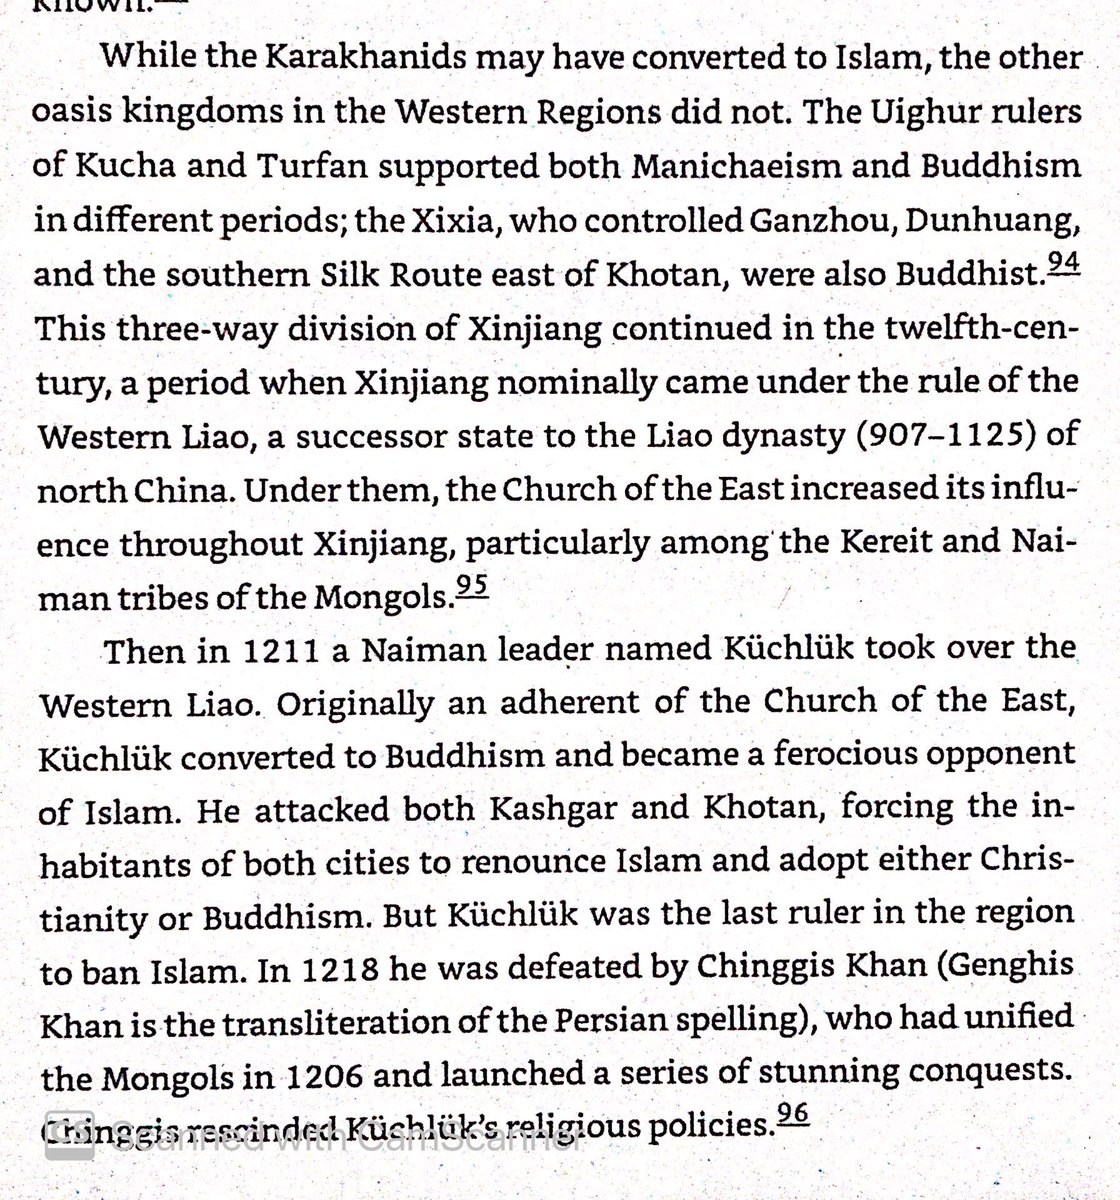 Western Liao Dynasty was strongly anti-Islamic & tried to force Kashgar & Hotan to renounce Islam in early 13th century. Genghis Khan destroyed them & stopped the religious persecution.